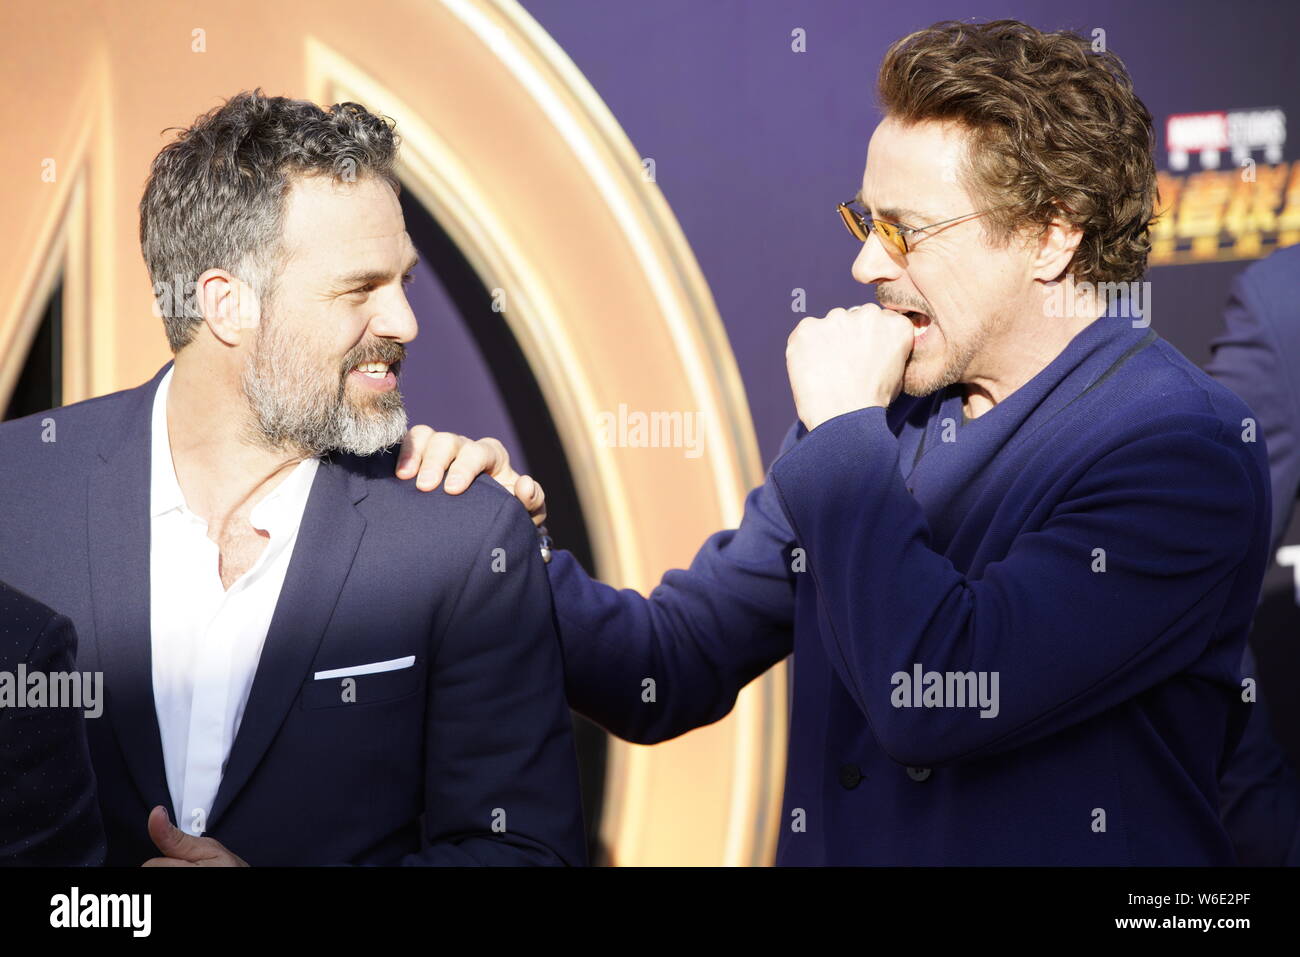 (From left) American actor and singer Robert Downey Jr. and English actor Tom Hiddleston pose as they arrive on the red carpet of a promotional event Stock Photo